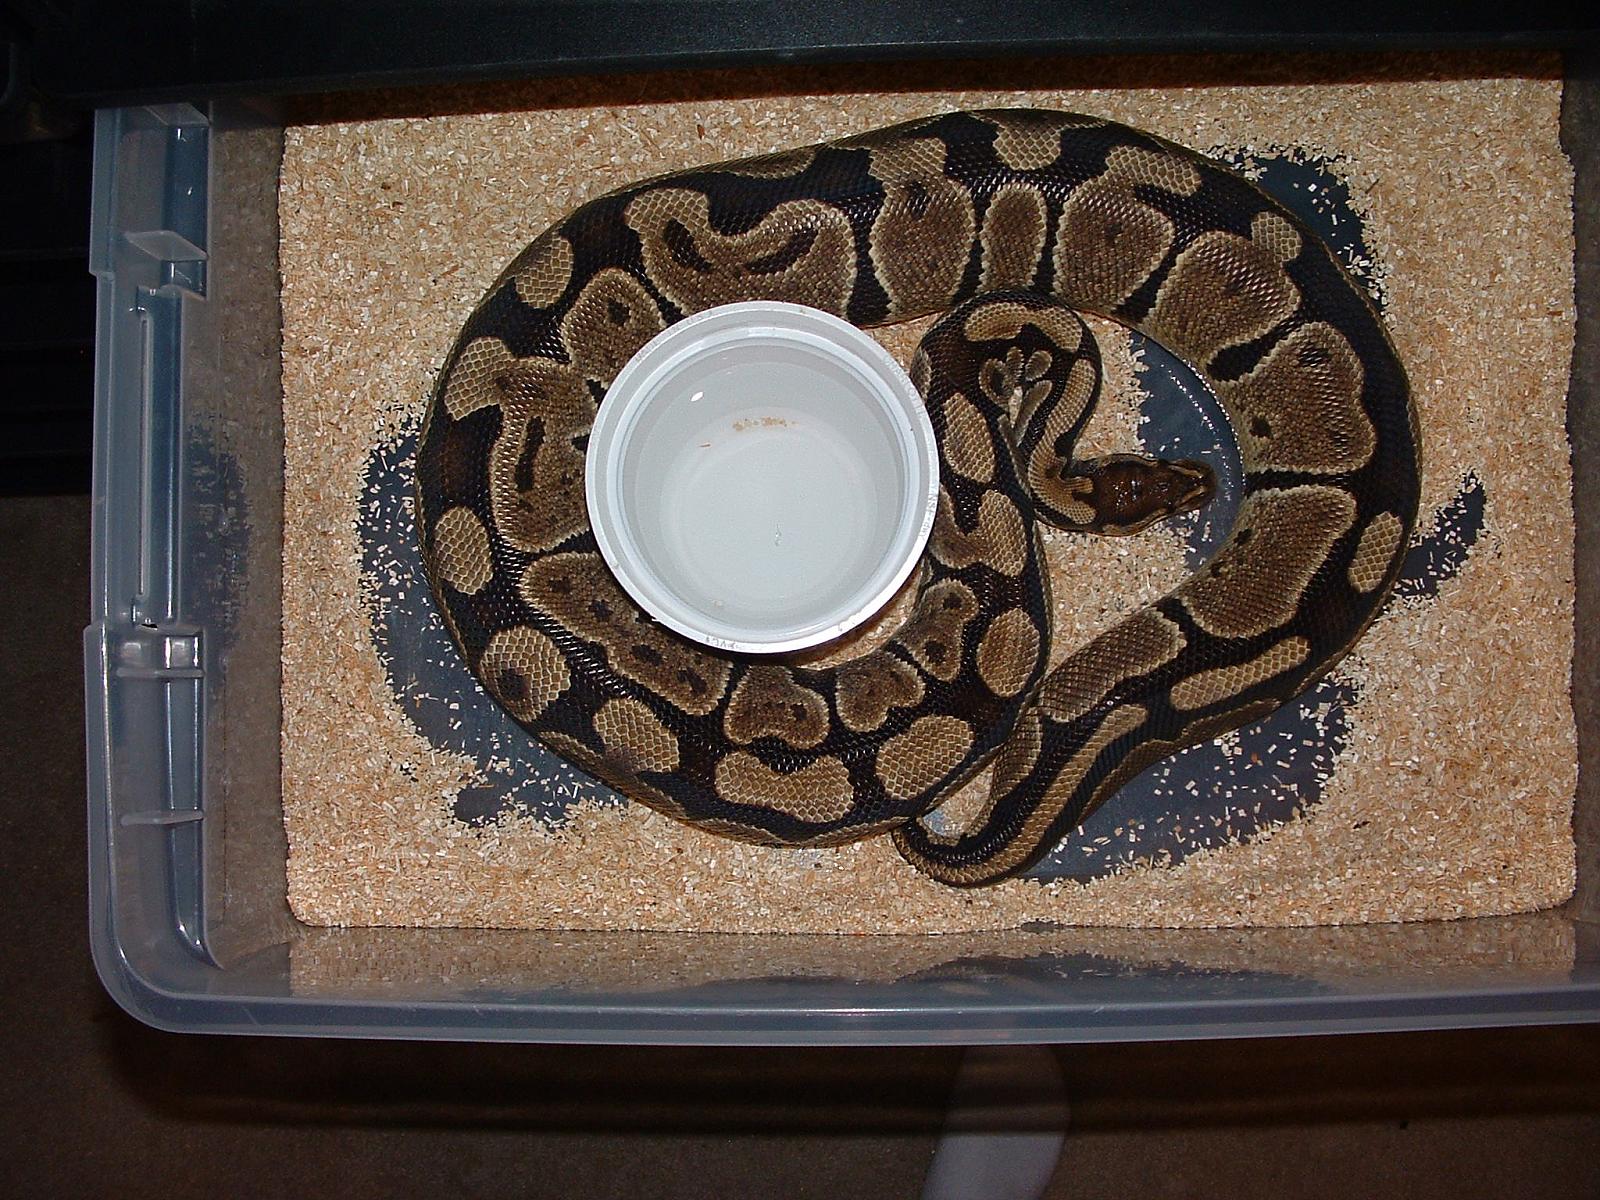 New Girl - Normal x Enchi Yellowbelly